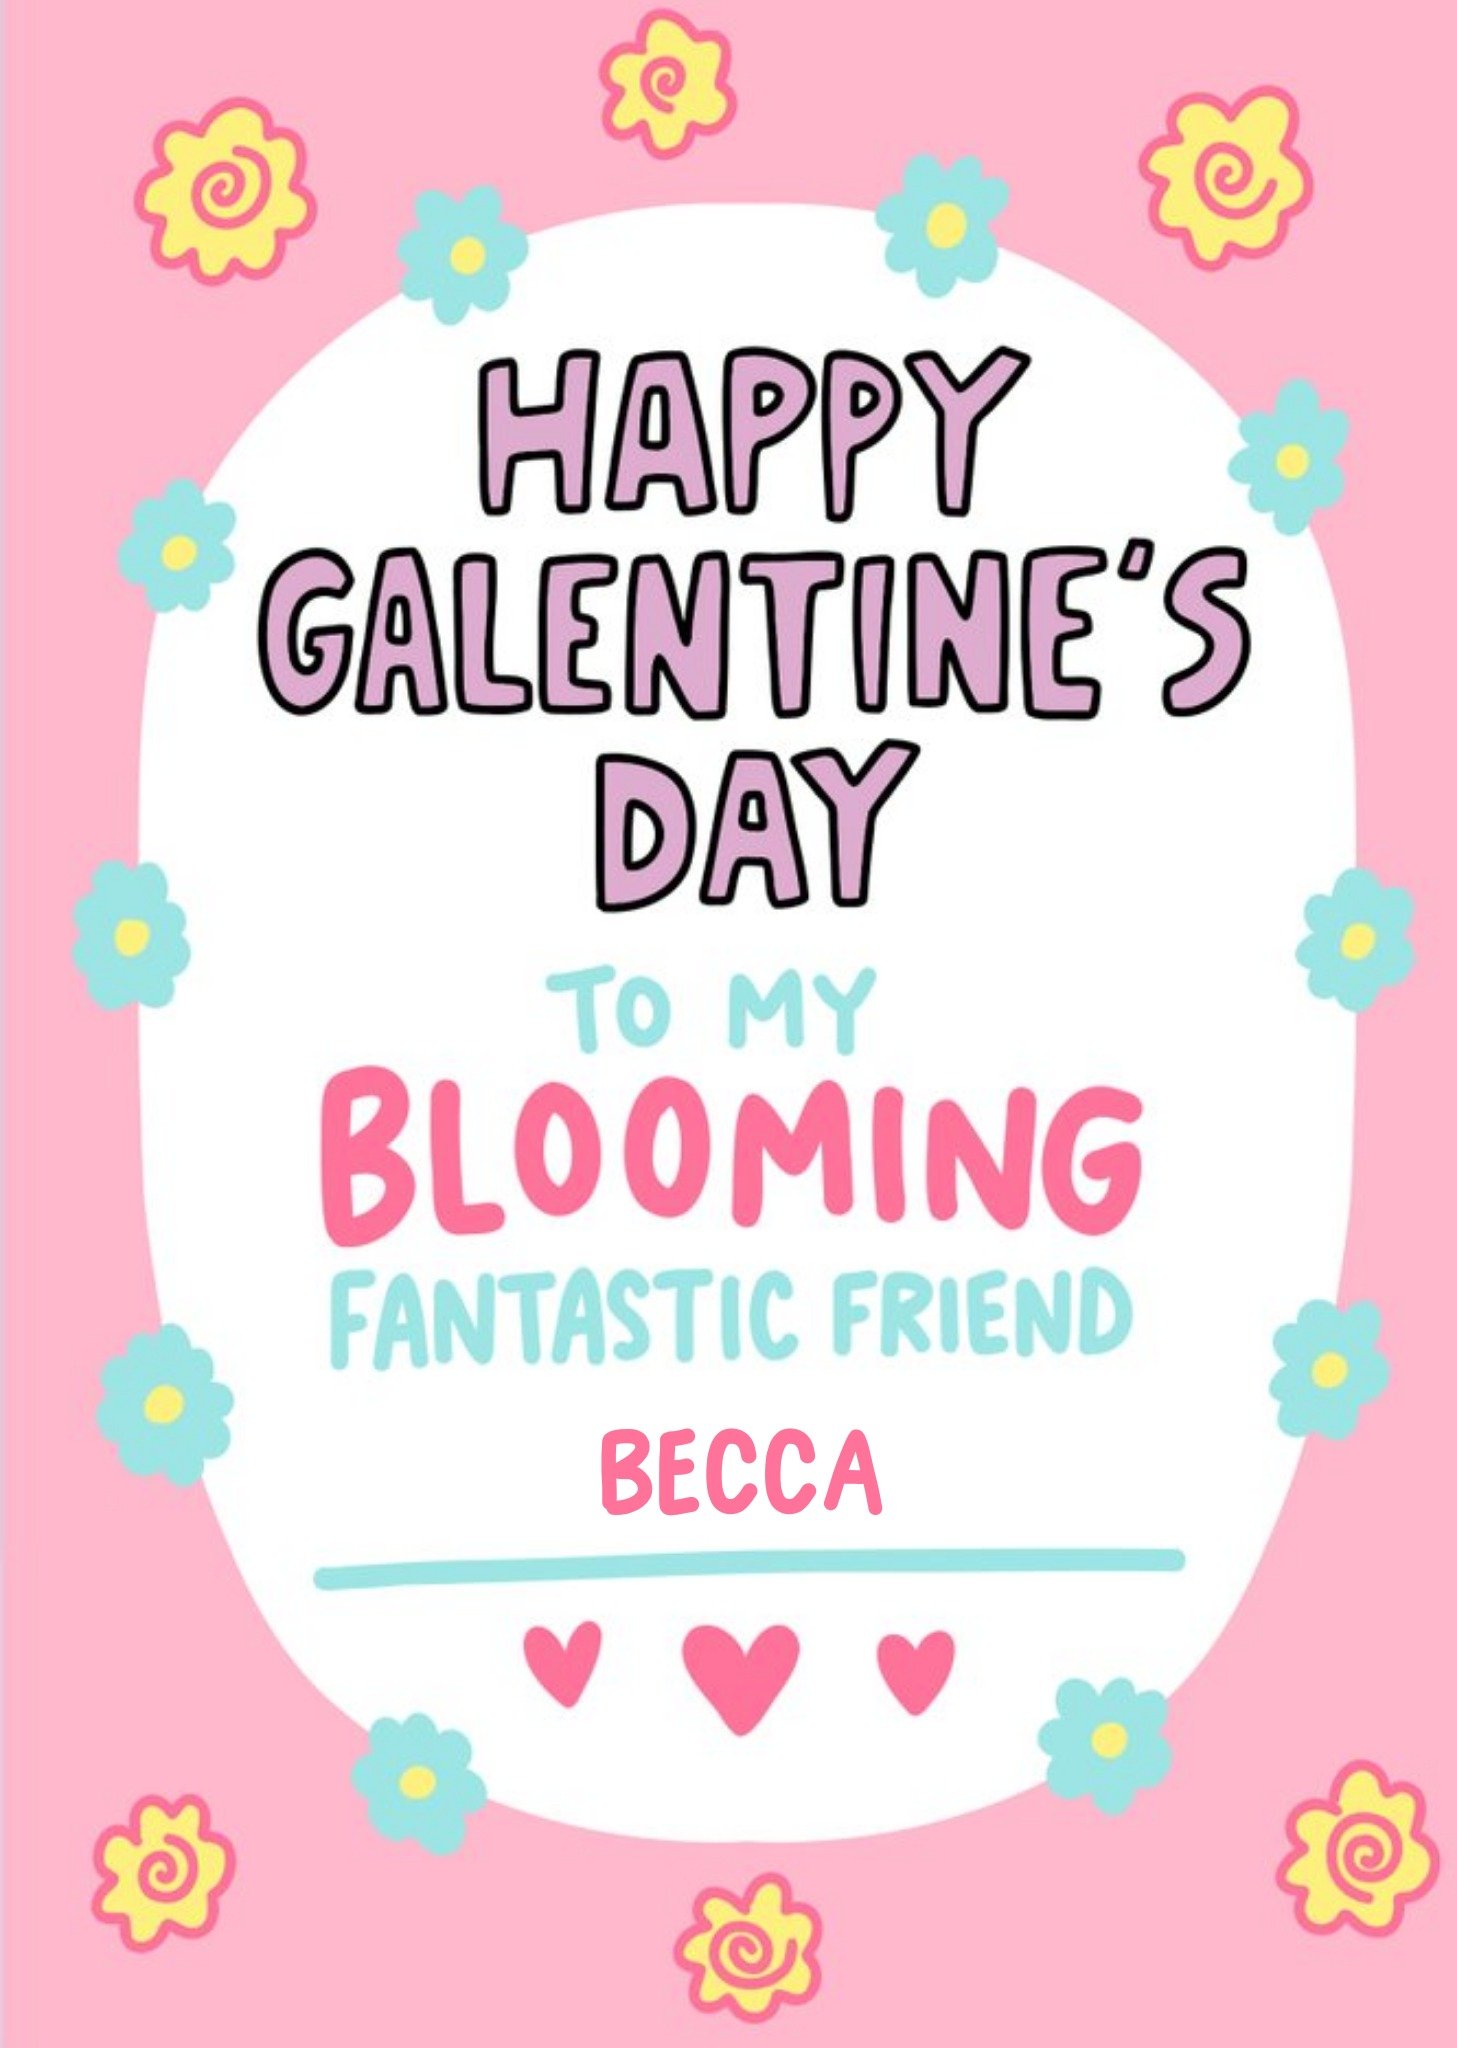 Moonpig Blooming Fantastic Friend Galentines Day Card By Angela Chick, Large